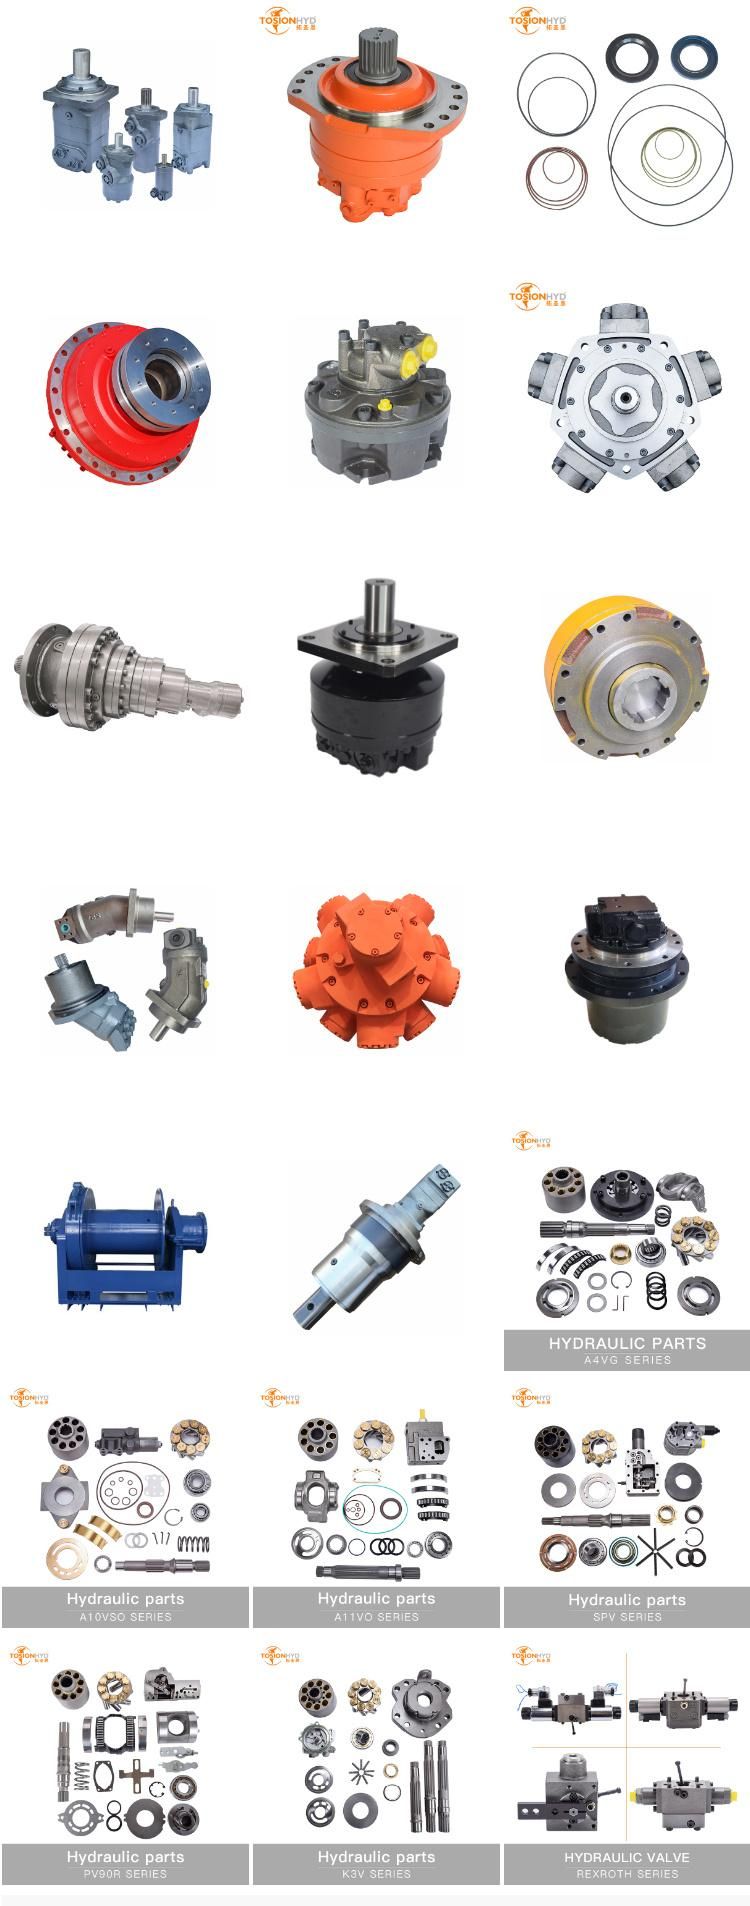 H1V H2V 55/75/108/160/226 H1c 55/75/108/160/226 H1c55 H1c75 H1c108 H1c160 H1c226 Hydraulic Pump Parts with Italy Sam Spare Repair Kits